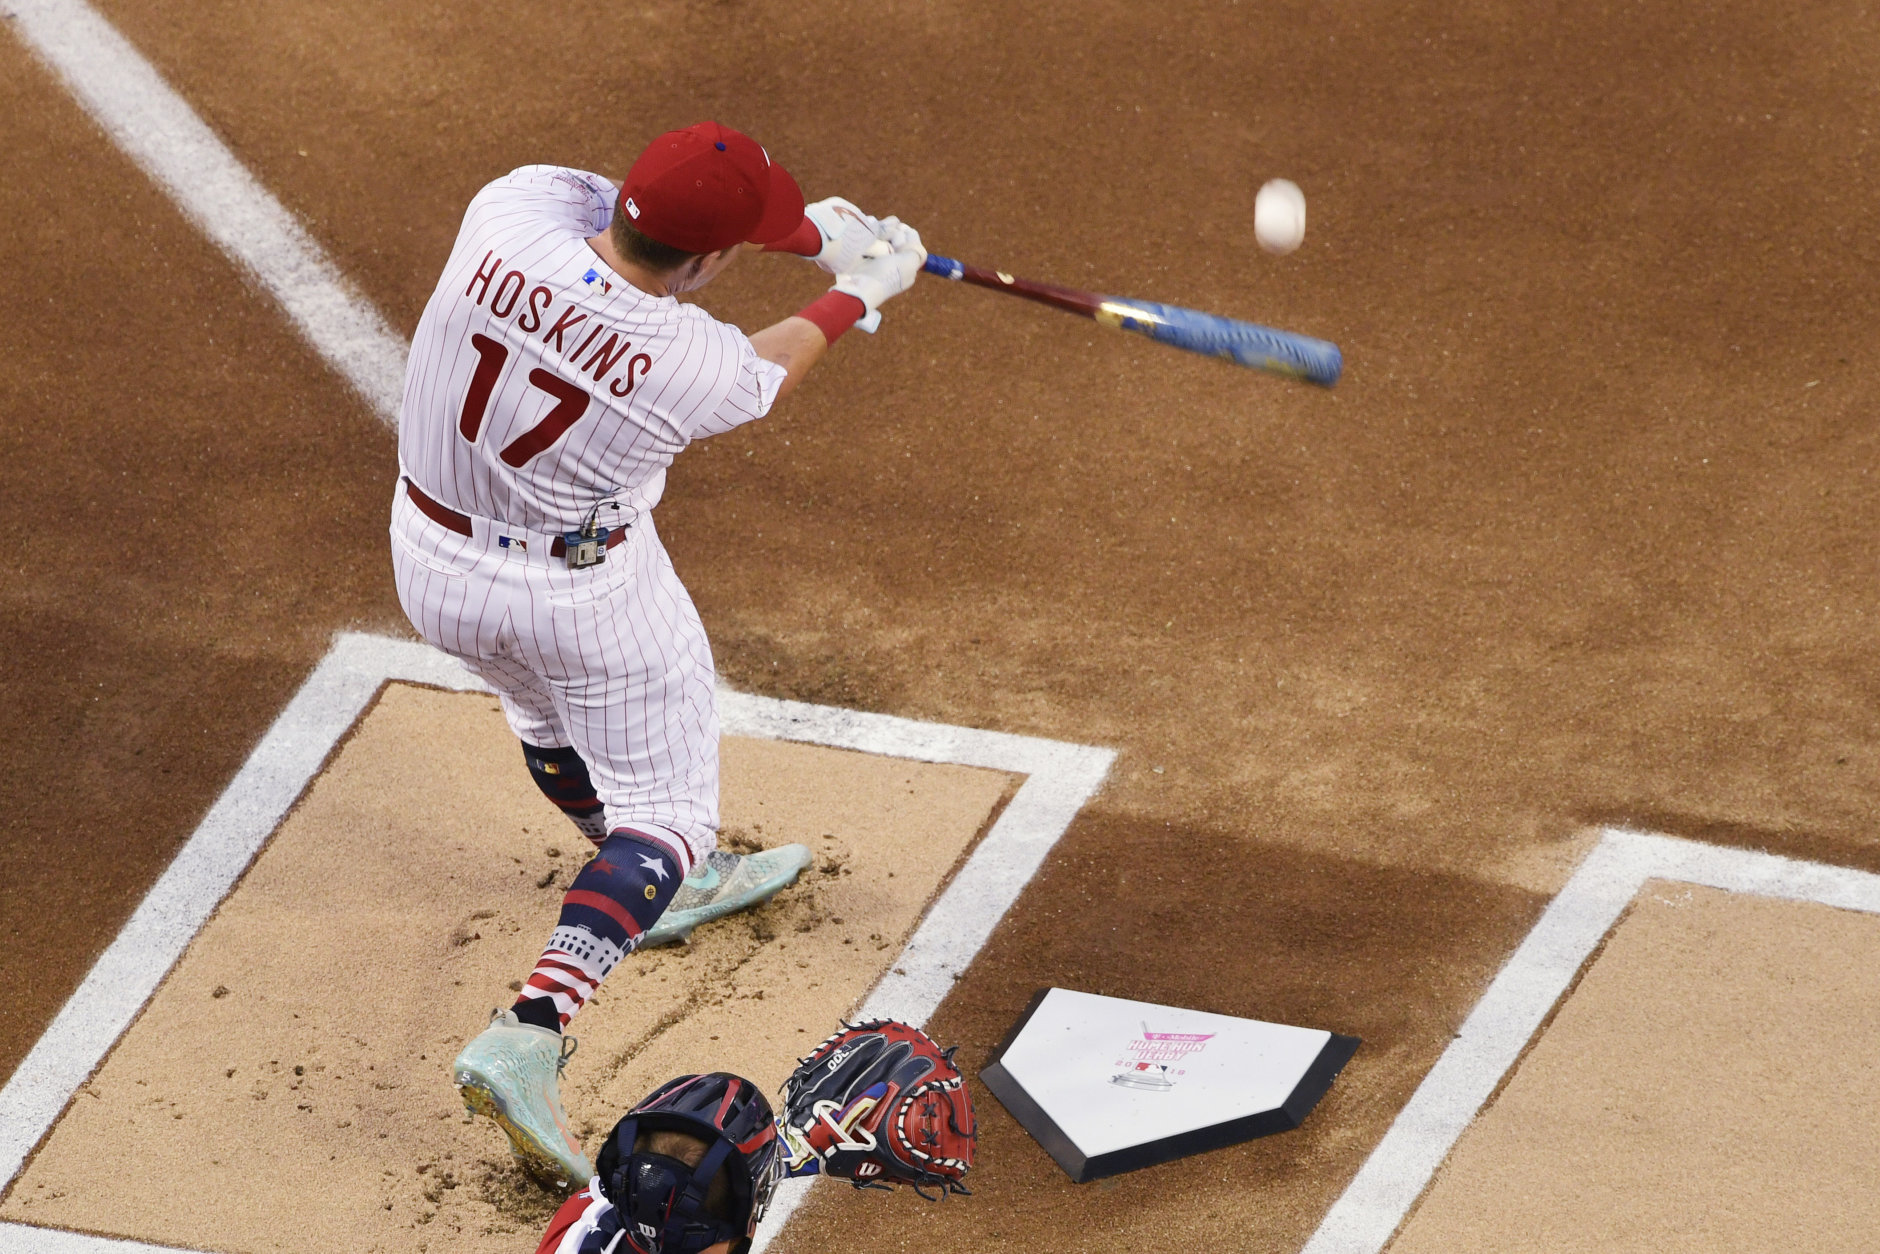 Philadelphia Phillies Rhys Hoskins (17) bats during the MLB Home Run Derby, at Nationals Park, Monday, July 16, 2018 in Washington. The 89th MLB baseball All-Star Game will be played Tuesday. (AP Photo/Susan Walsh)